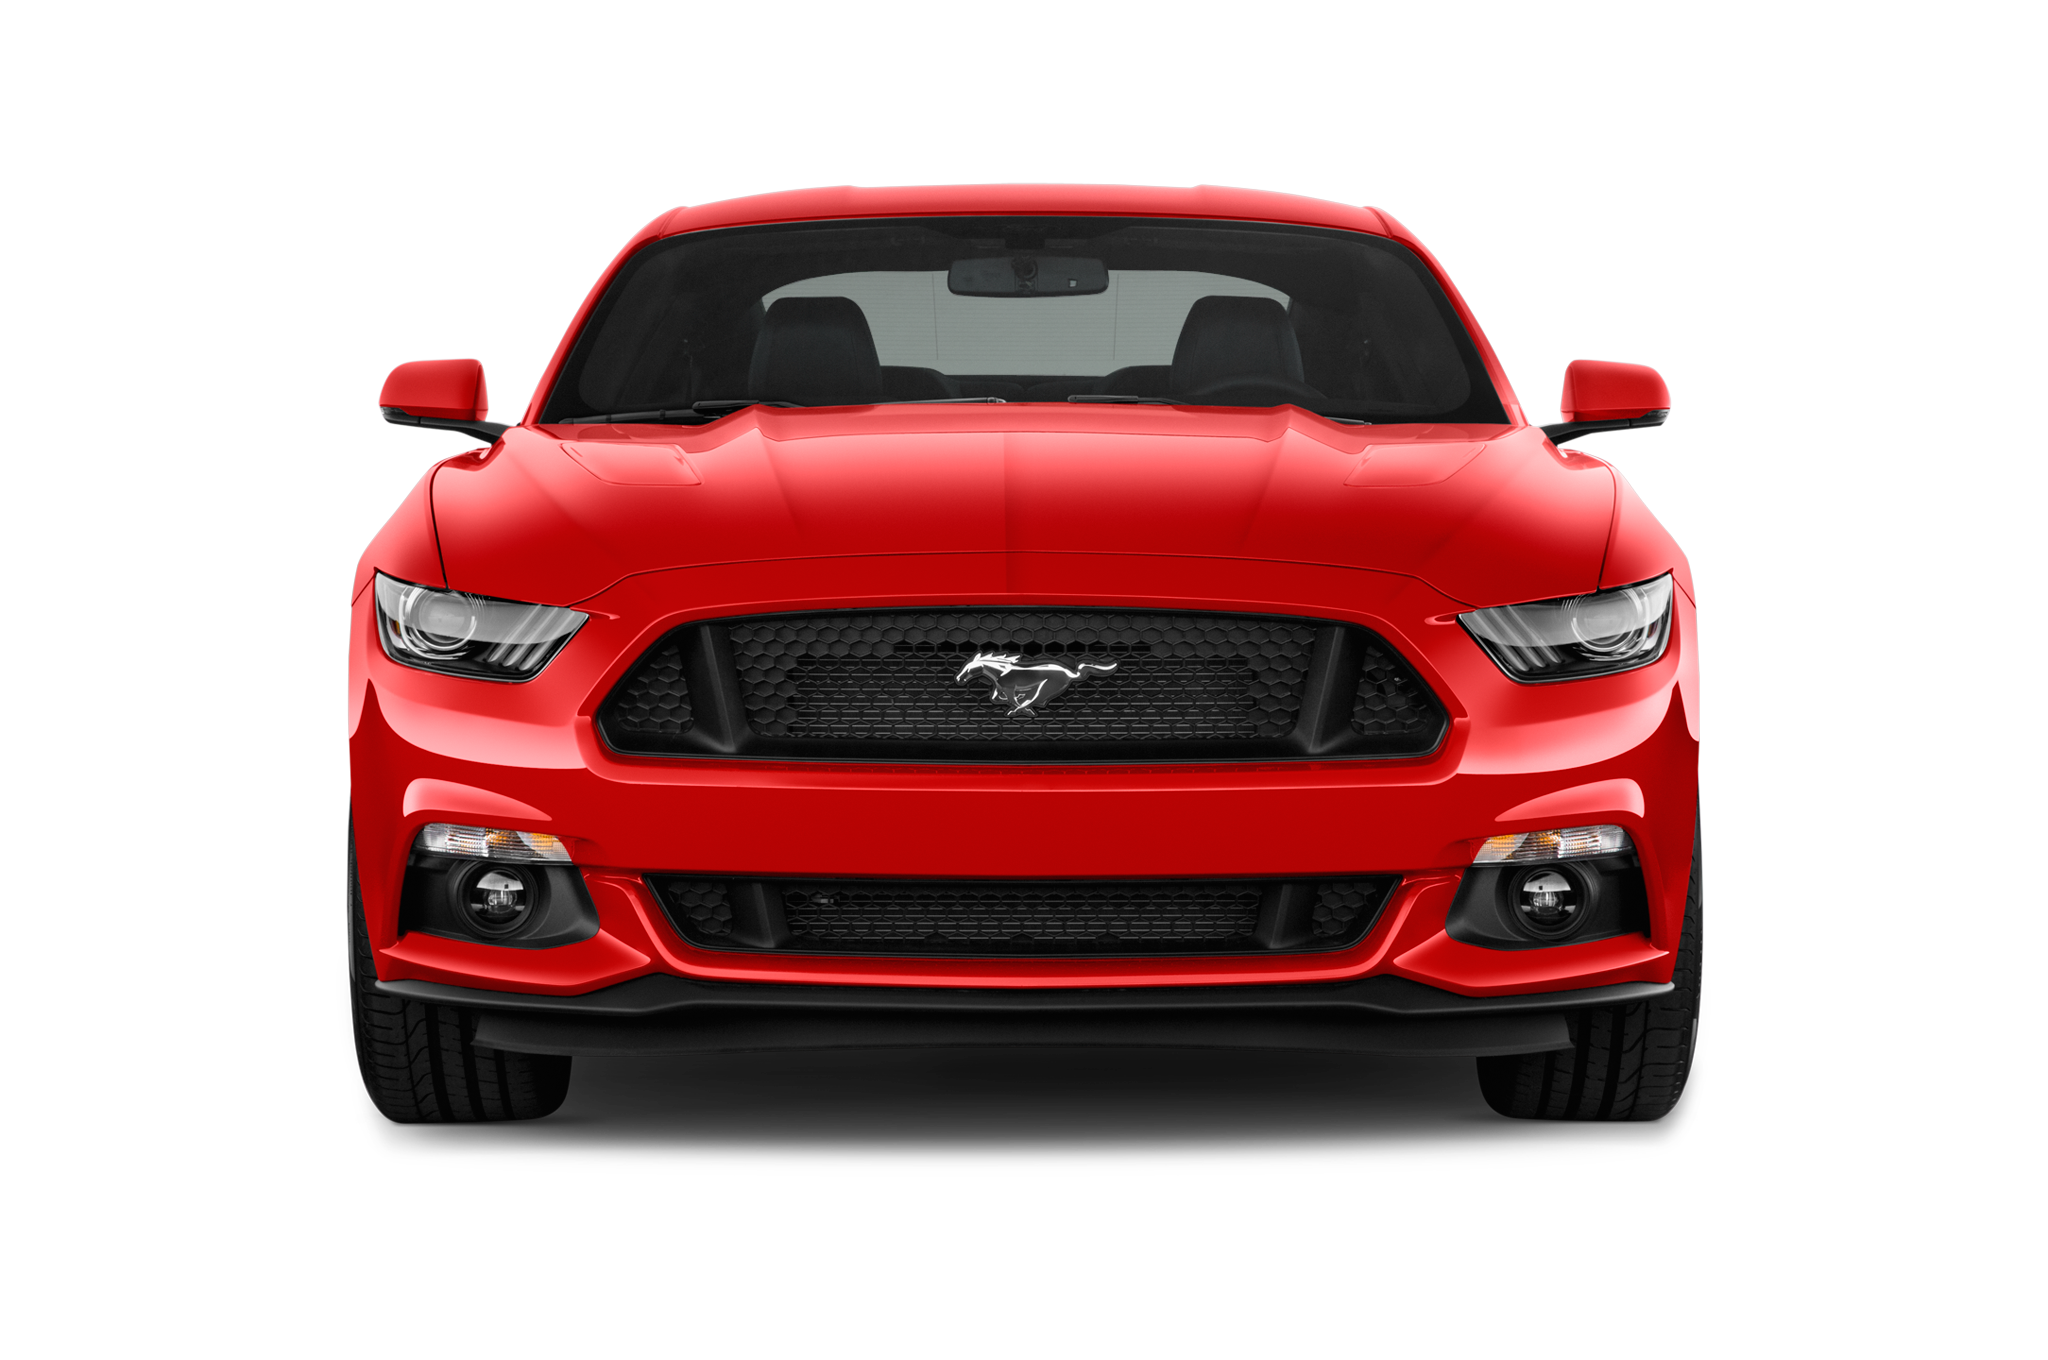 Ford Mustang Red PNG Photo